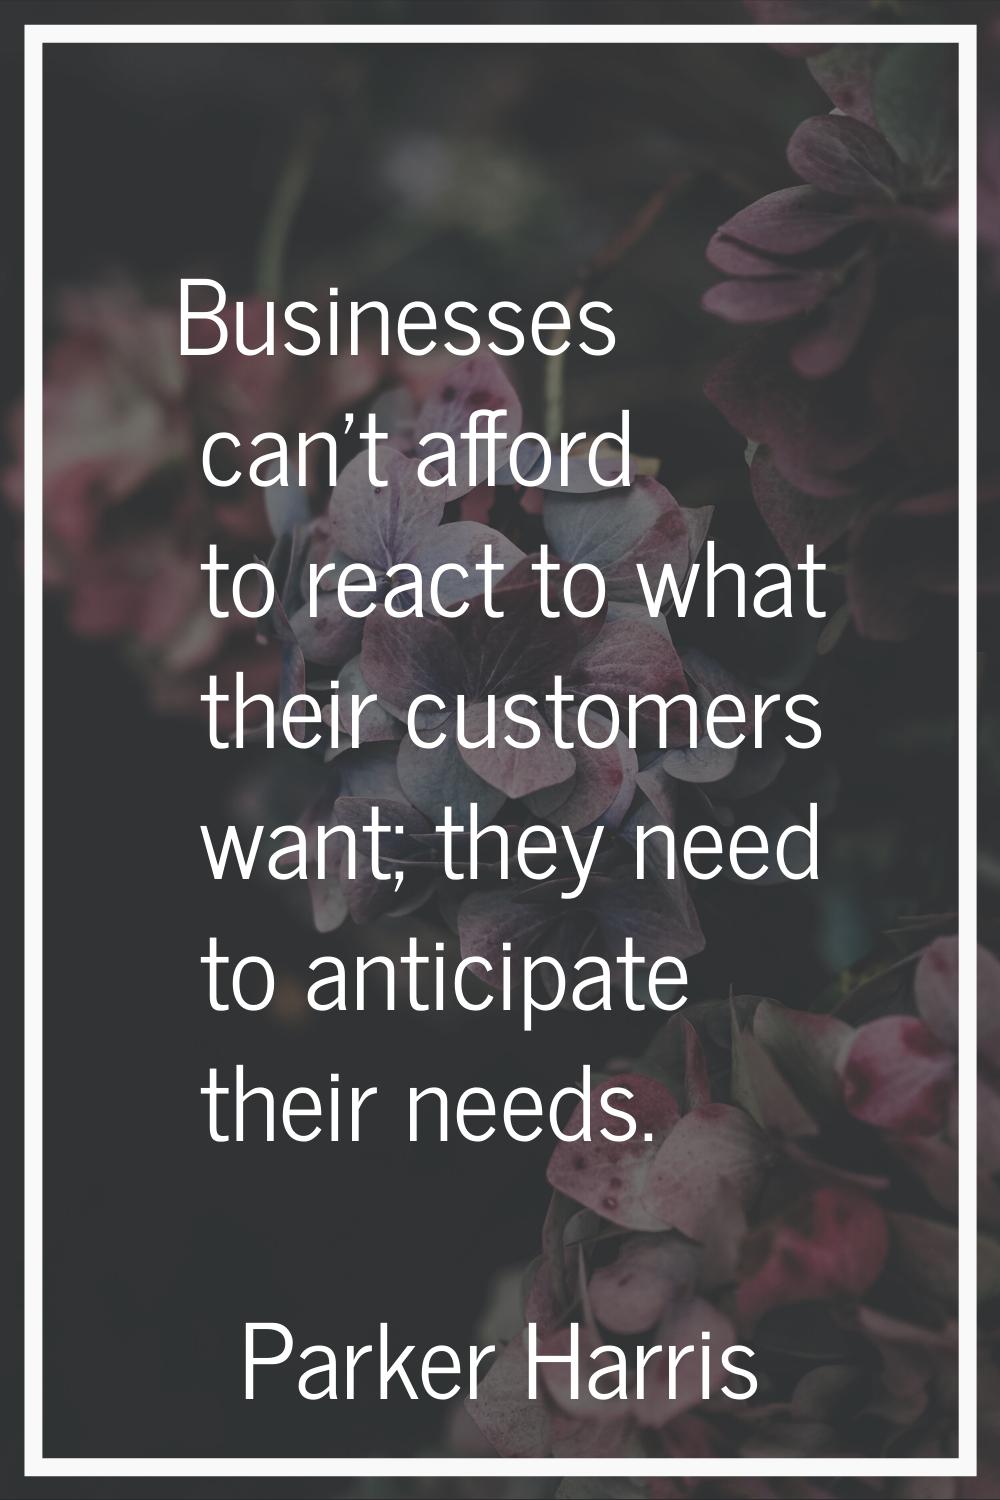 Businesses can't afford to react to what their customers want; they need to anticipate their needs.